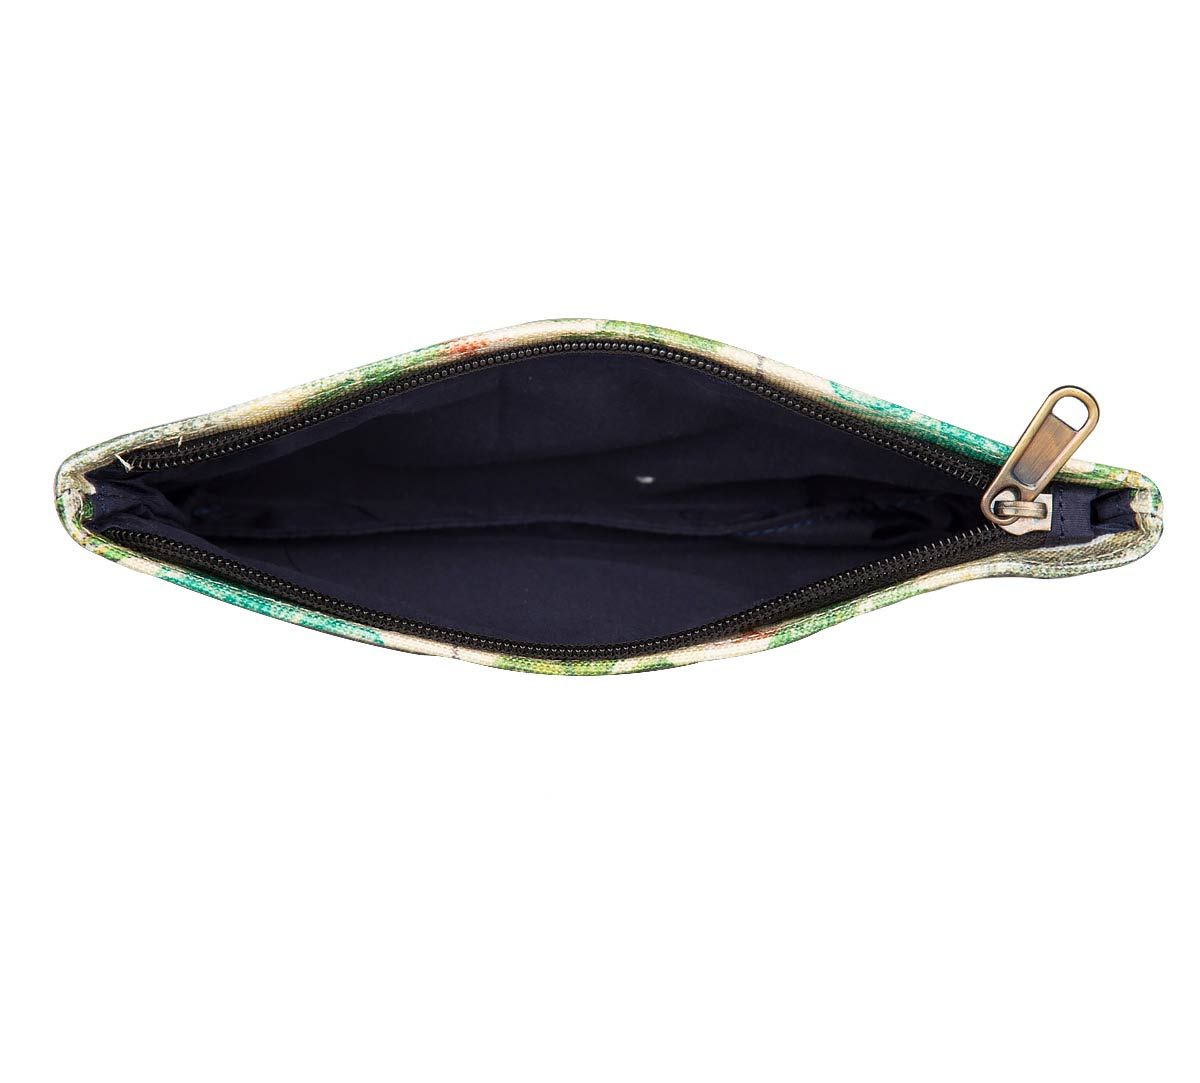 India Circus Forest Dominion Makeup Pouch